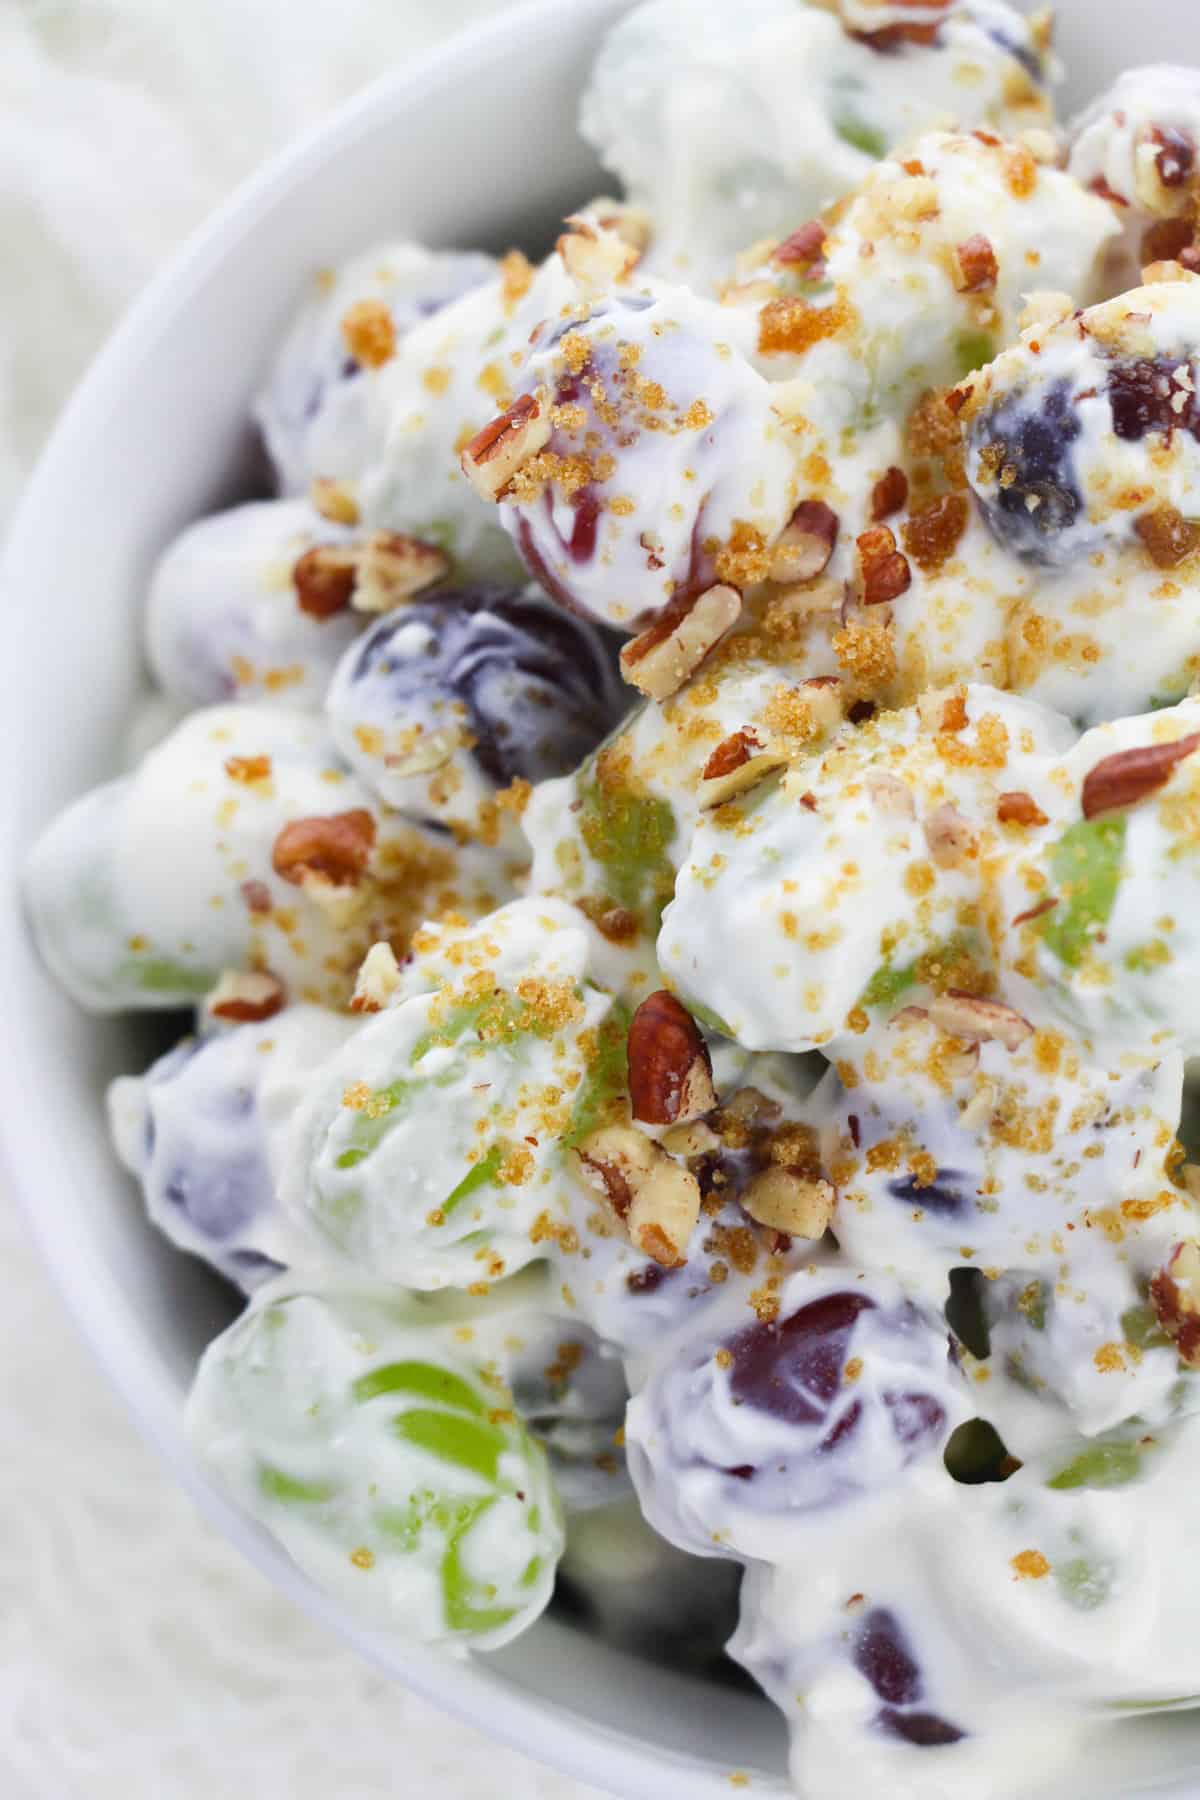 Grape salad with crunchy pecan and brown sugar topping sprinkled over it.